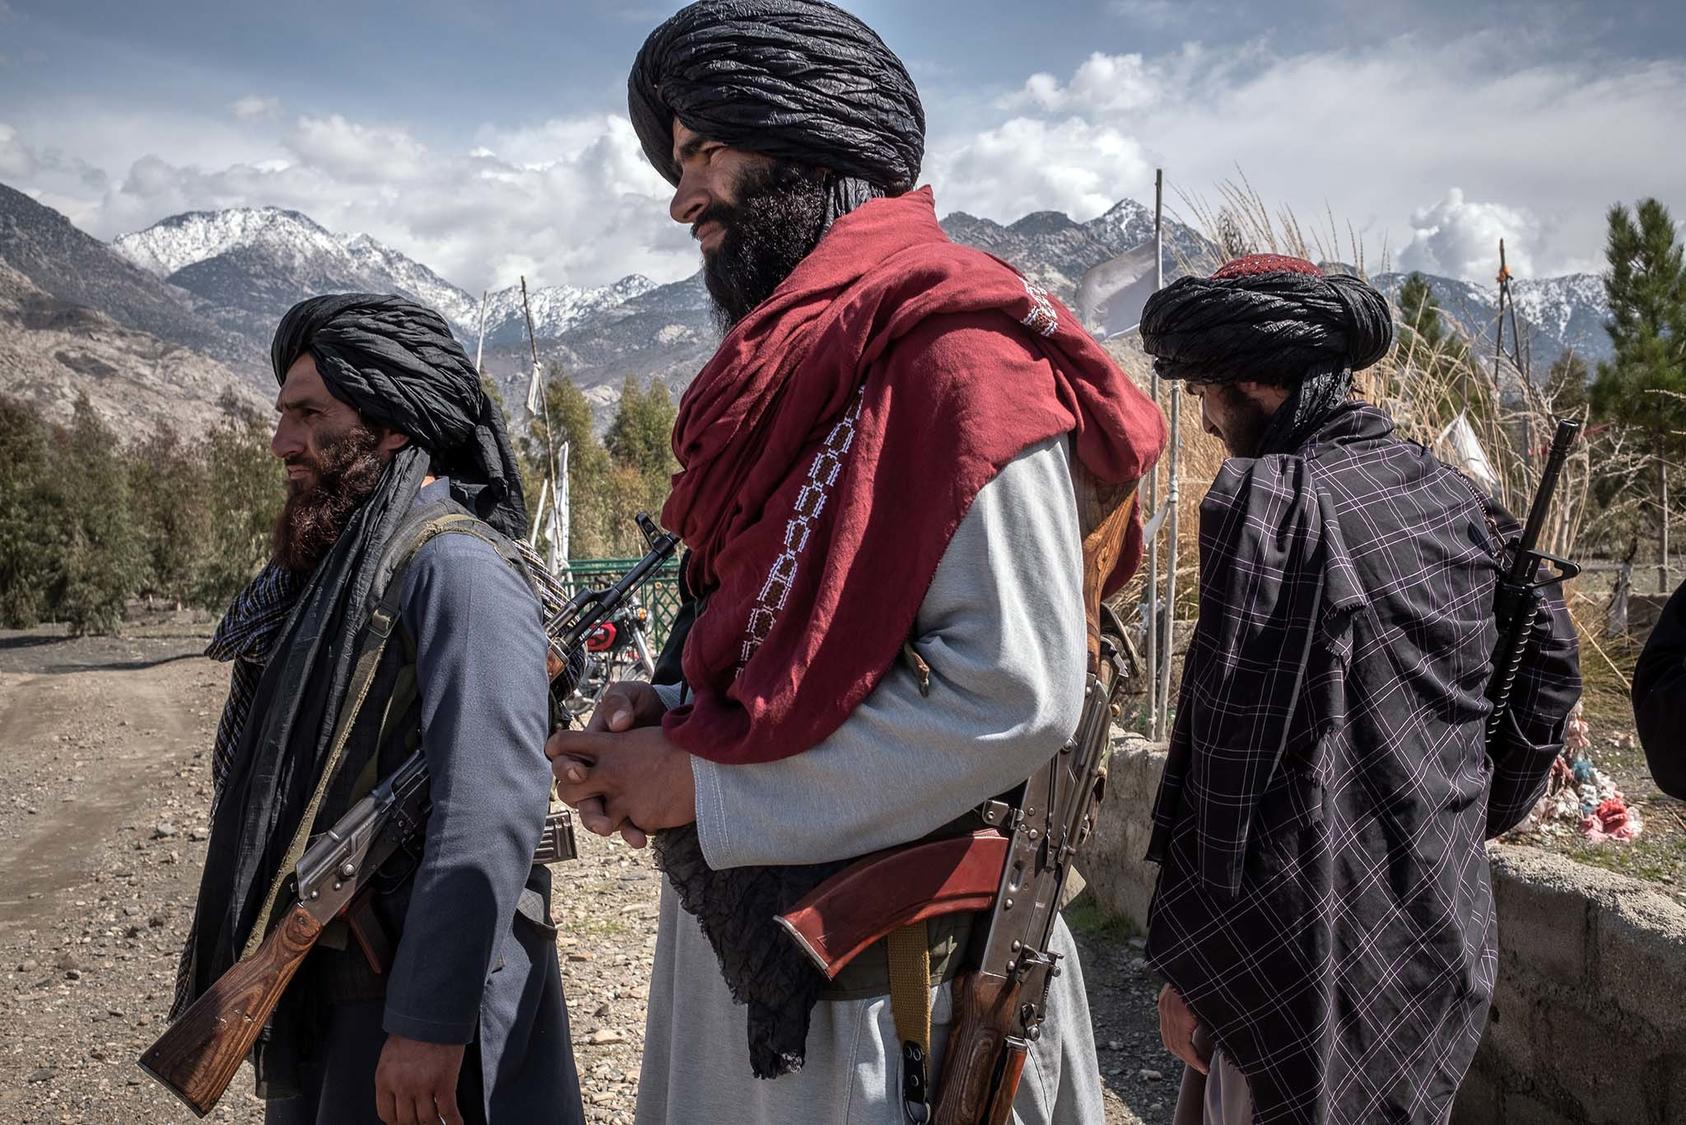 Members of the Taliban in Laghman Province, Afghanistan, on March 13, 2020. Many fear that the extremist group will return to power after the Americans leave. (Jim Huylebroek/The New York Times)